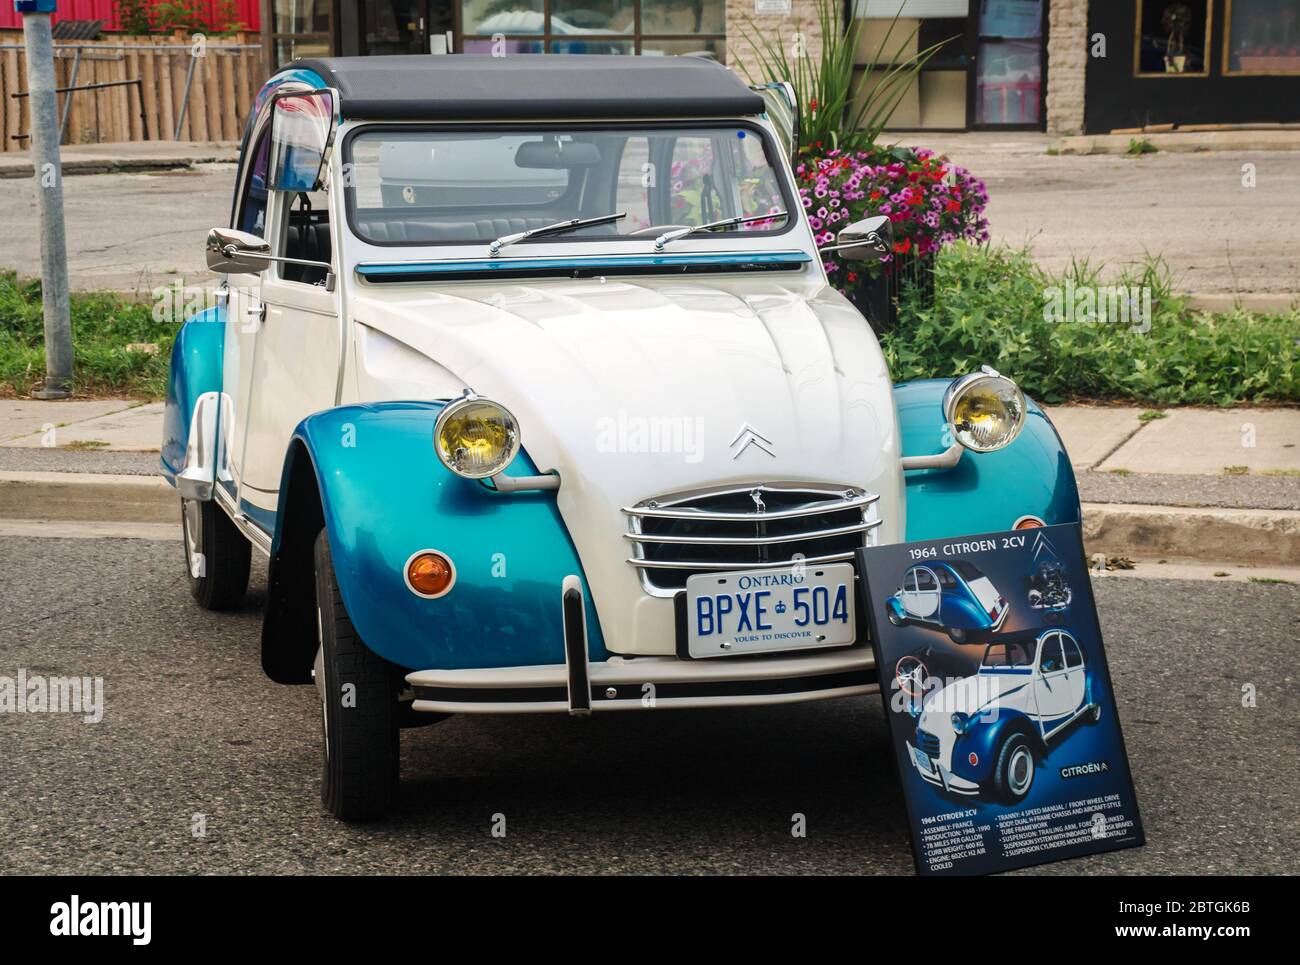 TORONTO, CANADA - 08 18 2018: 1964 Citroen 2CV oldtimer car made by French automobile manufacturer Citroen on display at the open air auto show Wheels Stock Photo